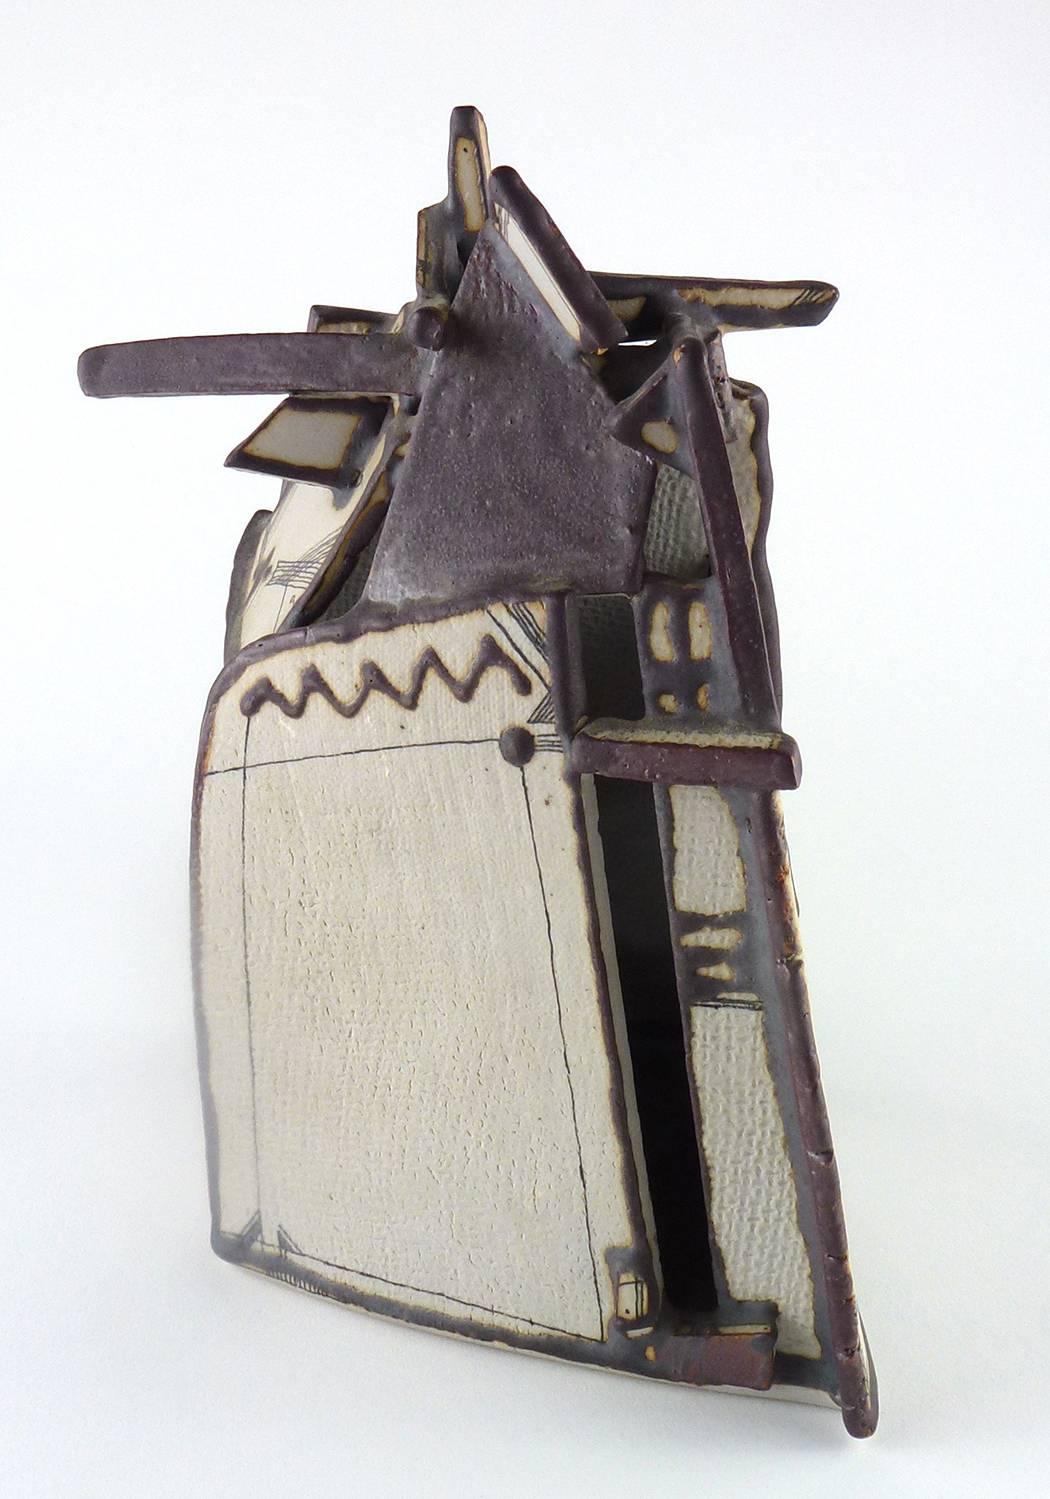 Peteris Martinsons (Latvia, 1931-2013) contemporary studio pottery slab-constructed tower, the tapering rectangular and irregularly-formed structure topped by a cluster of beams or bars painted brown, the body enamelled in black ink with linear